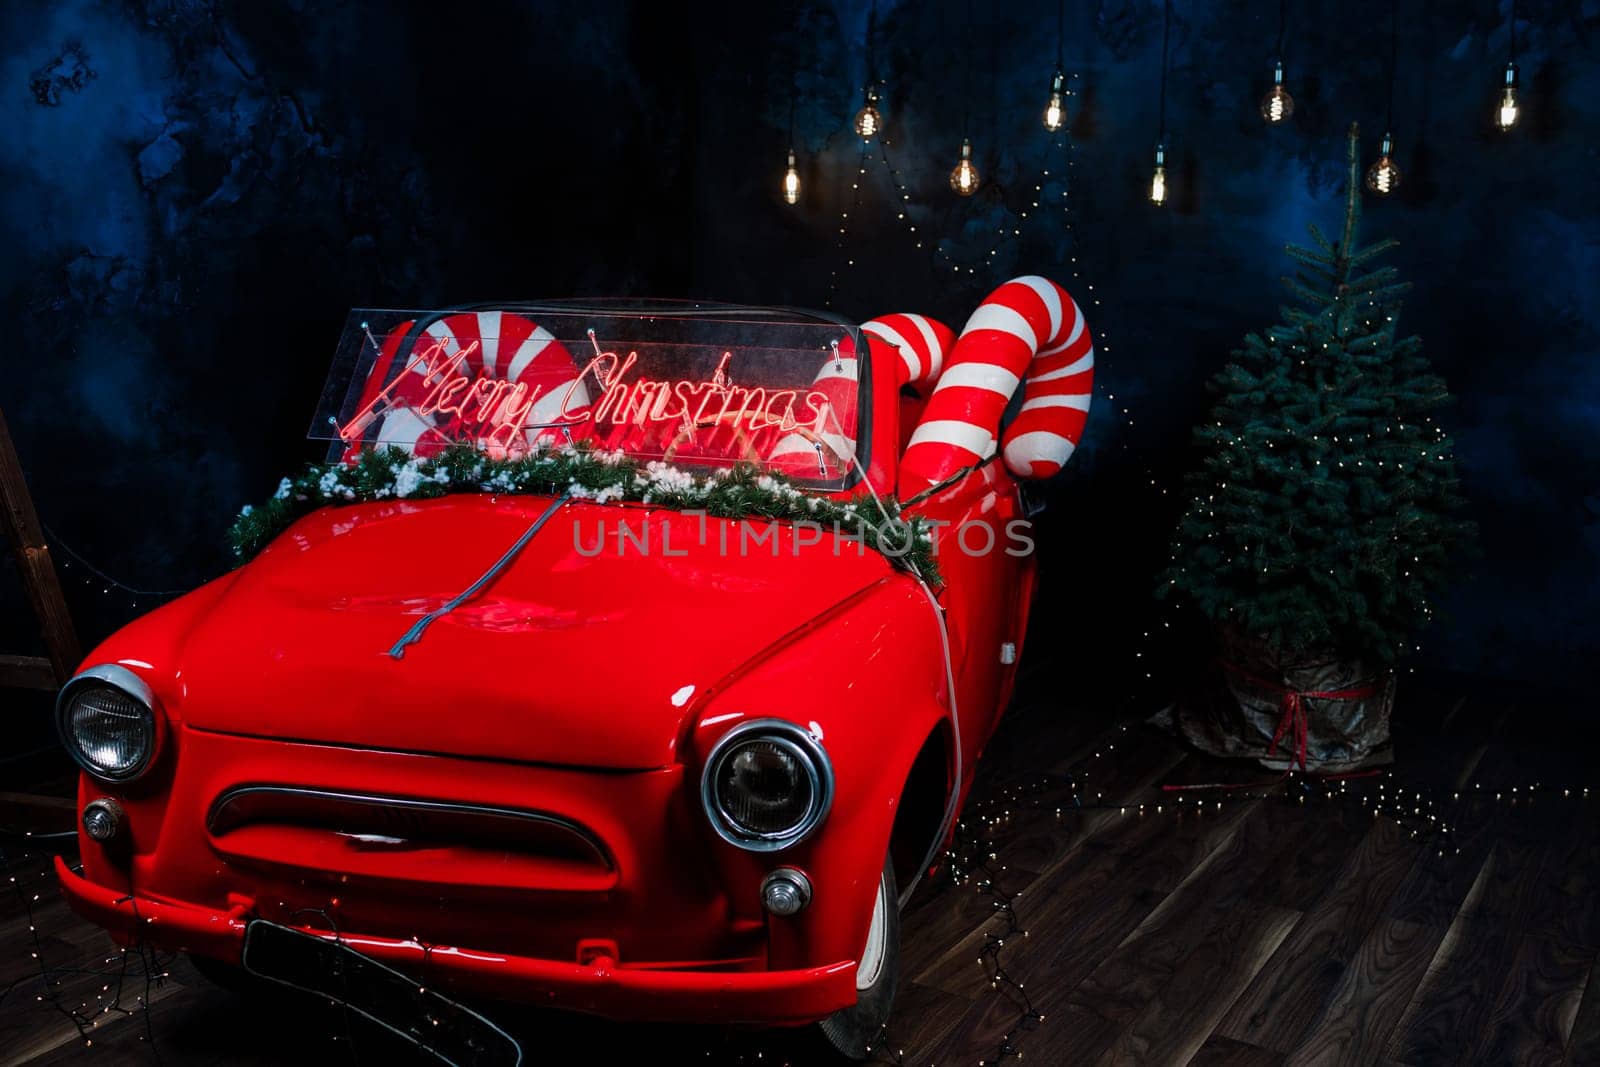 tro red car with led red inscription merry christmas on it. big christmas lollipops in the car in studio background.